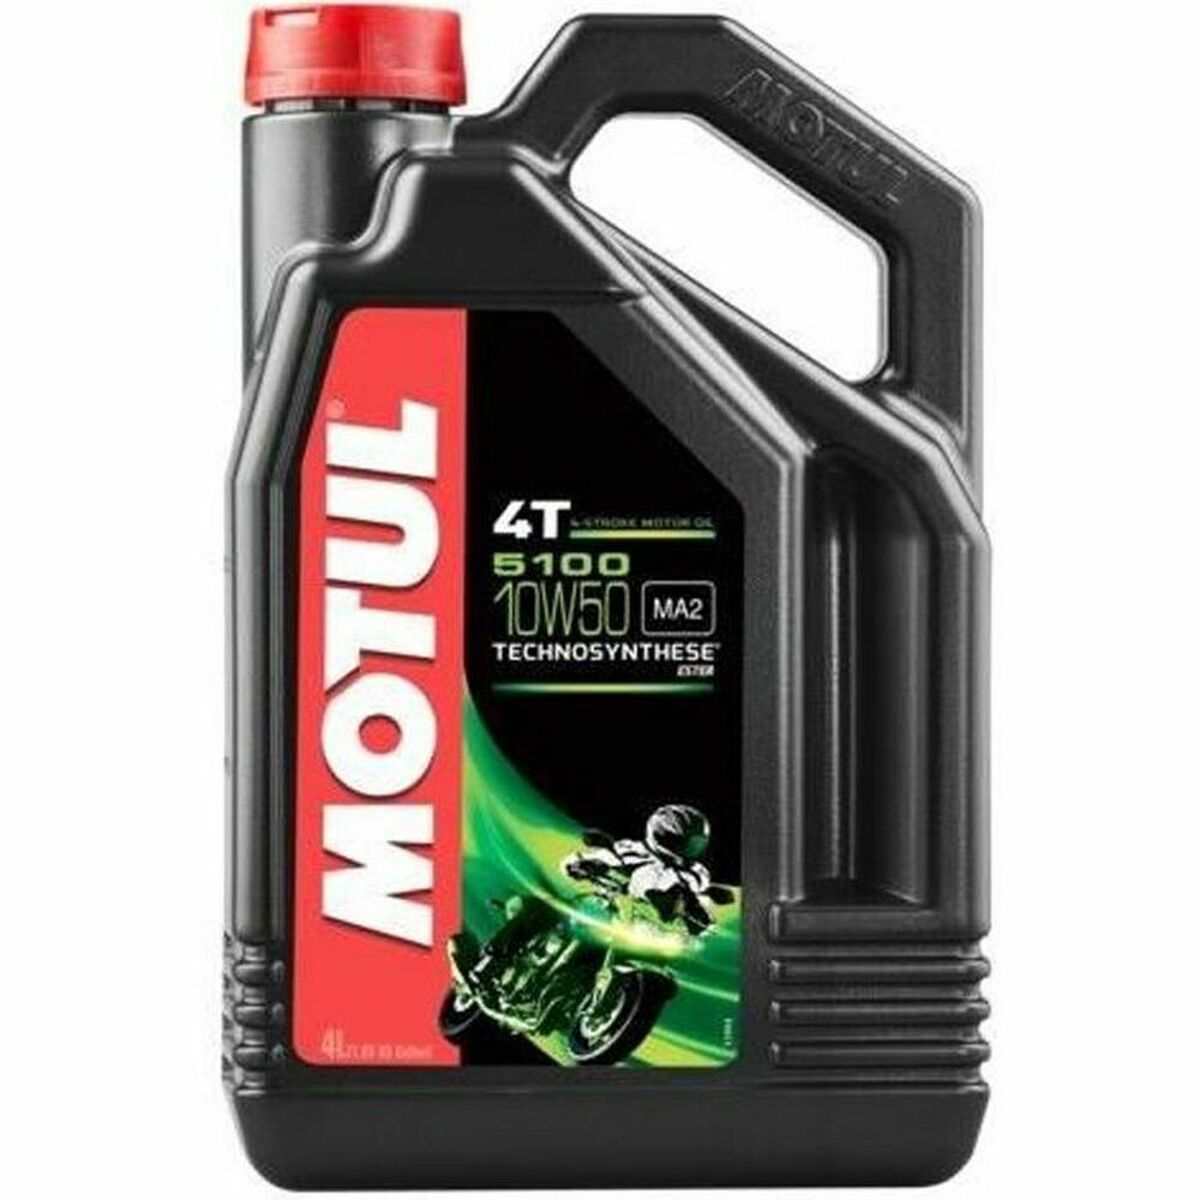 Motor Oil for Motorcycle 5100 10w50 4 L